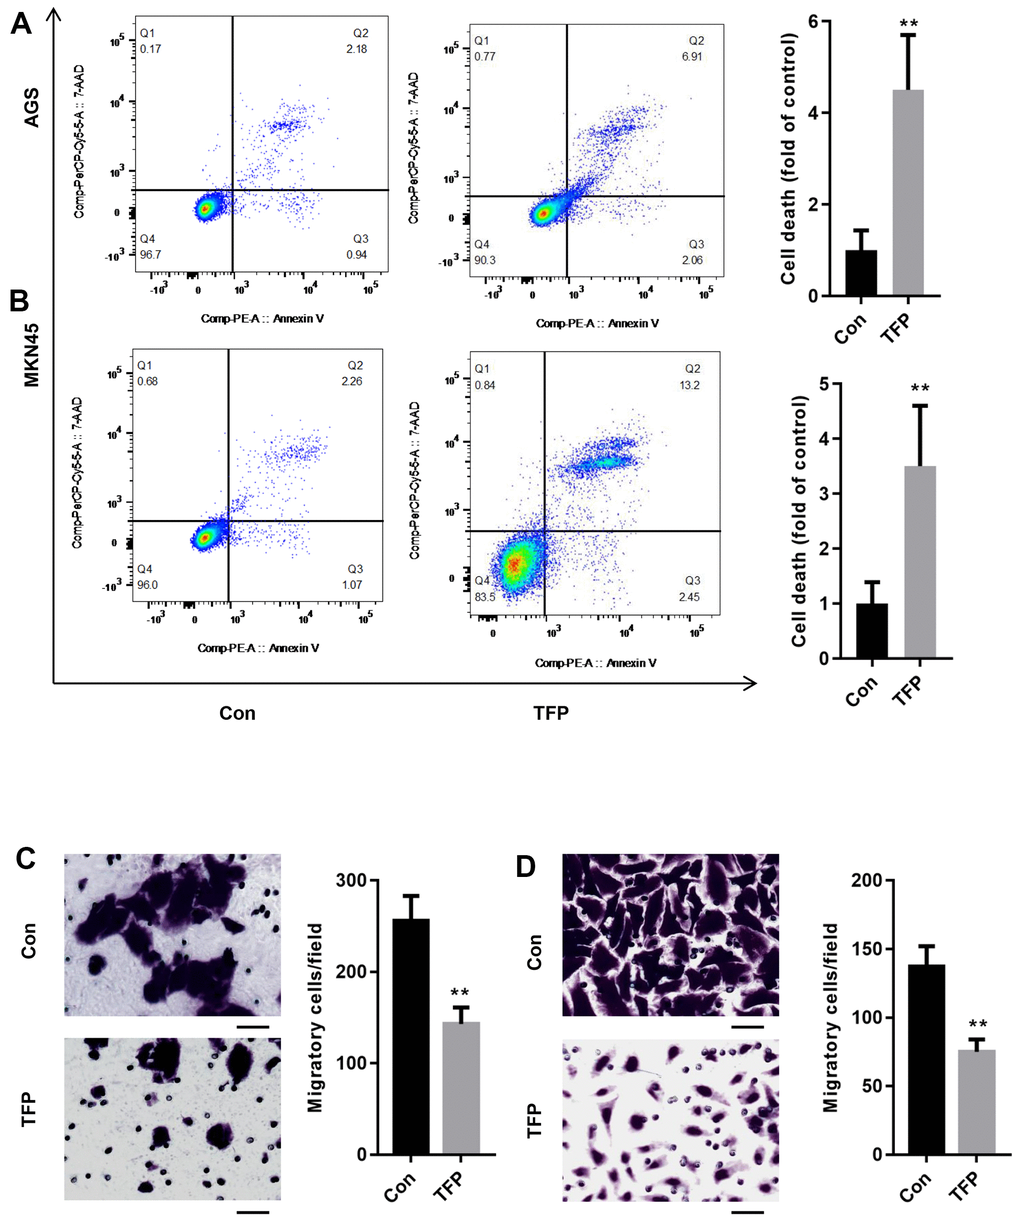 TFP induced cell death and suppressed cell migration in EBV-infected AGS and MKN45 cells. EBV-infected AGS and MKN45 cells were treated with 40 μg/mL and 20 μg/mL TFP for 24 h. Flow cytometry showed that TFP significantly elevated cell death in EBV-transfected AGS (A) and MKN45 (B) cells. Transwell assays demonstrated that TFP suppressed EBV-transfected AGS (C) and MKN45 (D) cell migration. **p